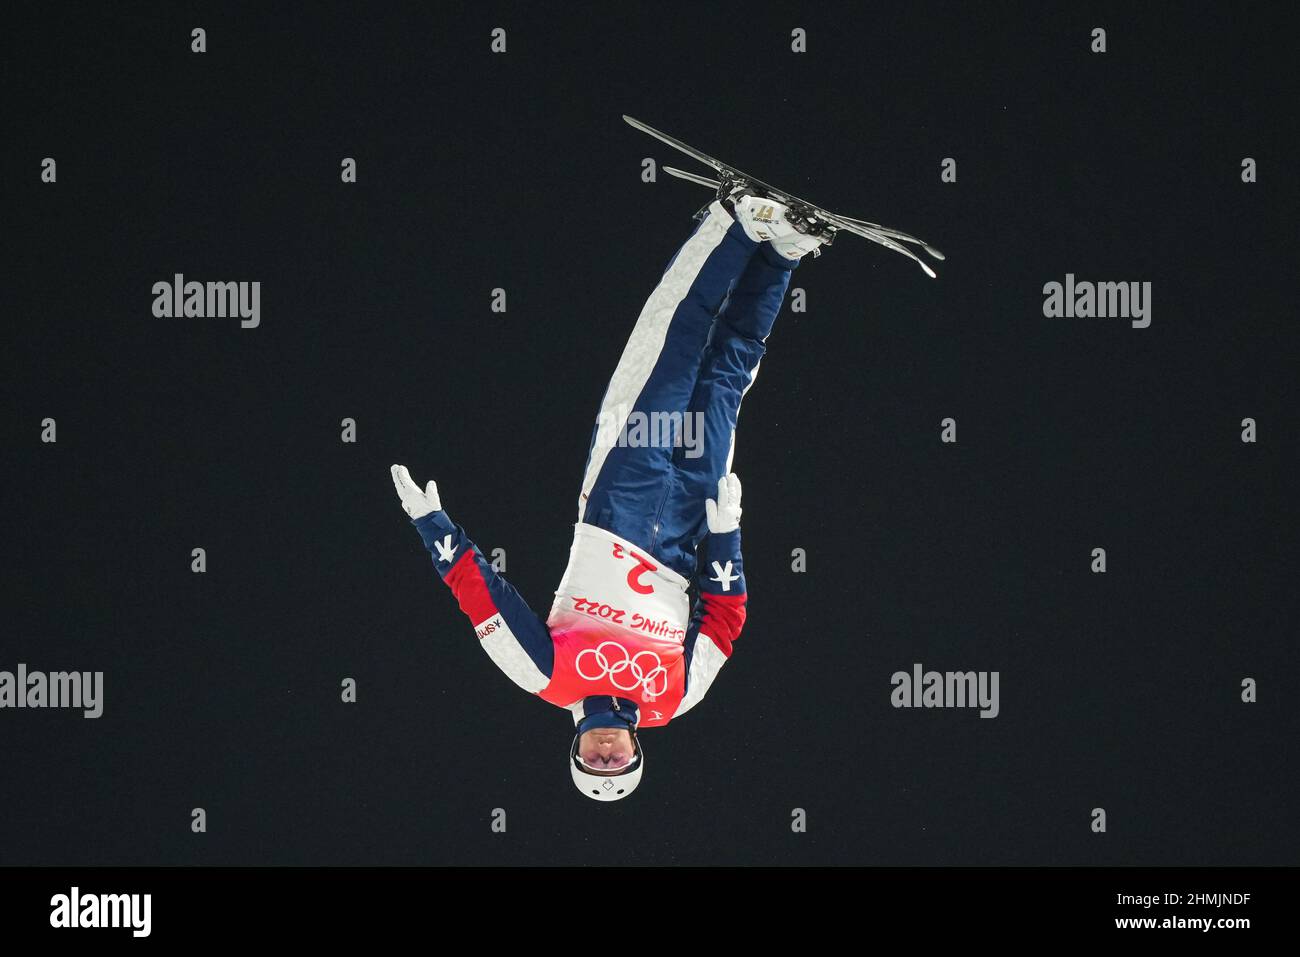 (220210) -- ZHANGJIAKOU, Feb. 10, 2022 (Xinhua) -- Justin Schoenefeld of the United States competes during the freestyle skiing mixed team aerials final at Genting Snow Park in Zhangjiakou, north China's Hebei Province, Feb. 10, 2022. (Xinhua/Xue Yubin) Stock Photo